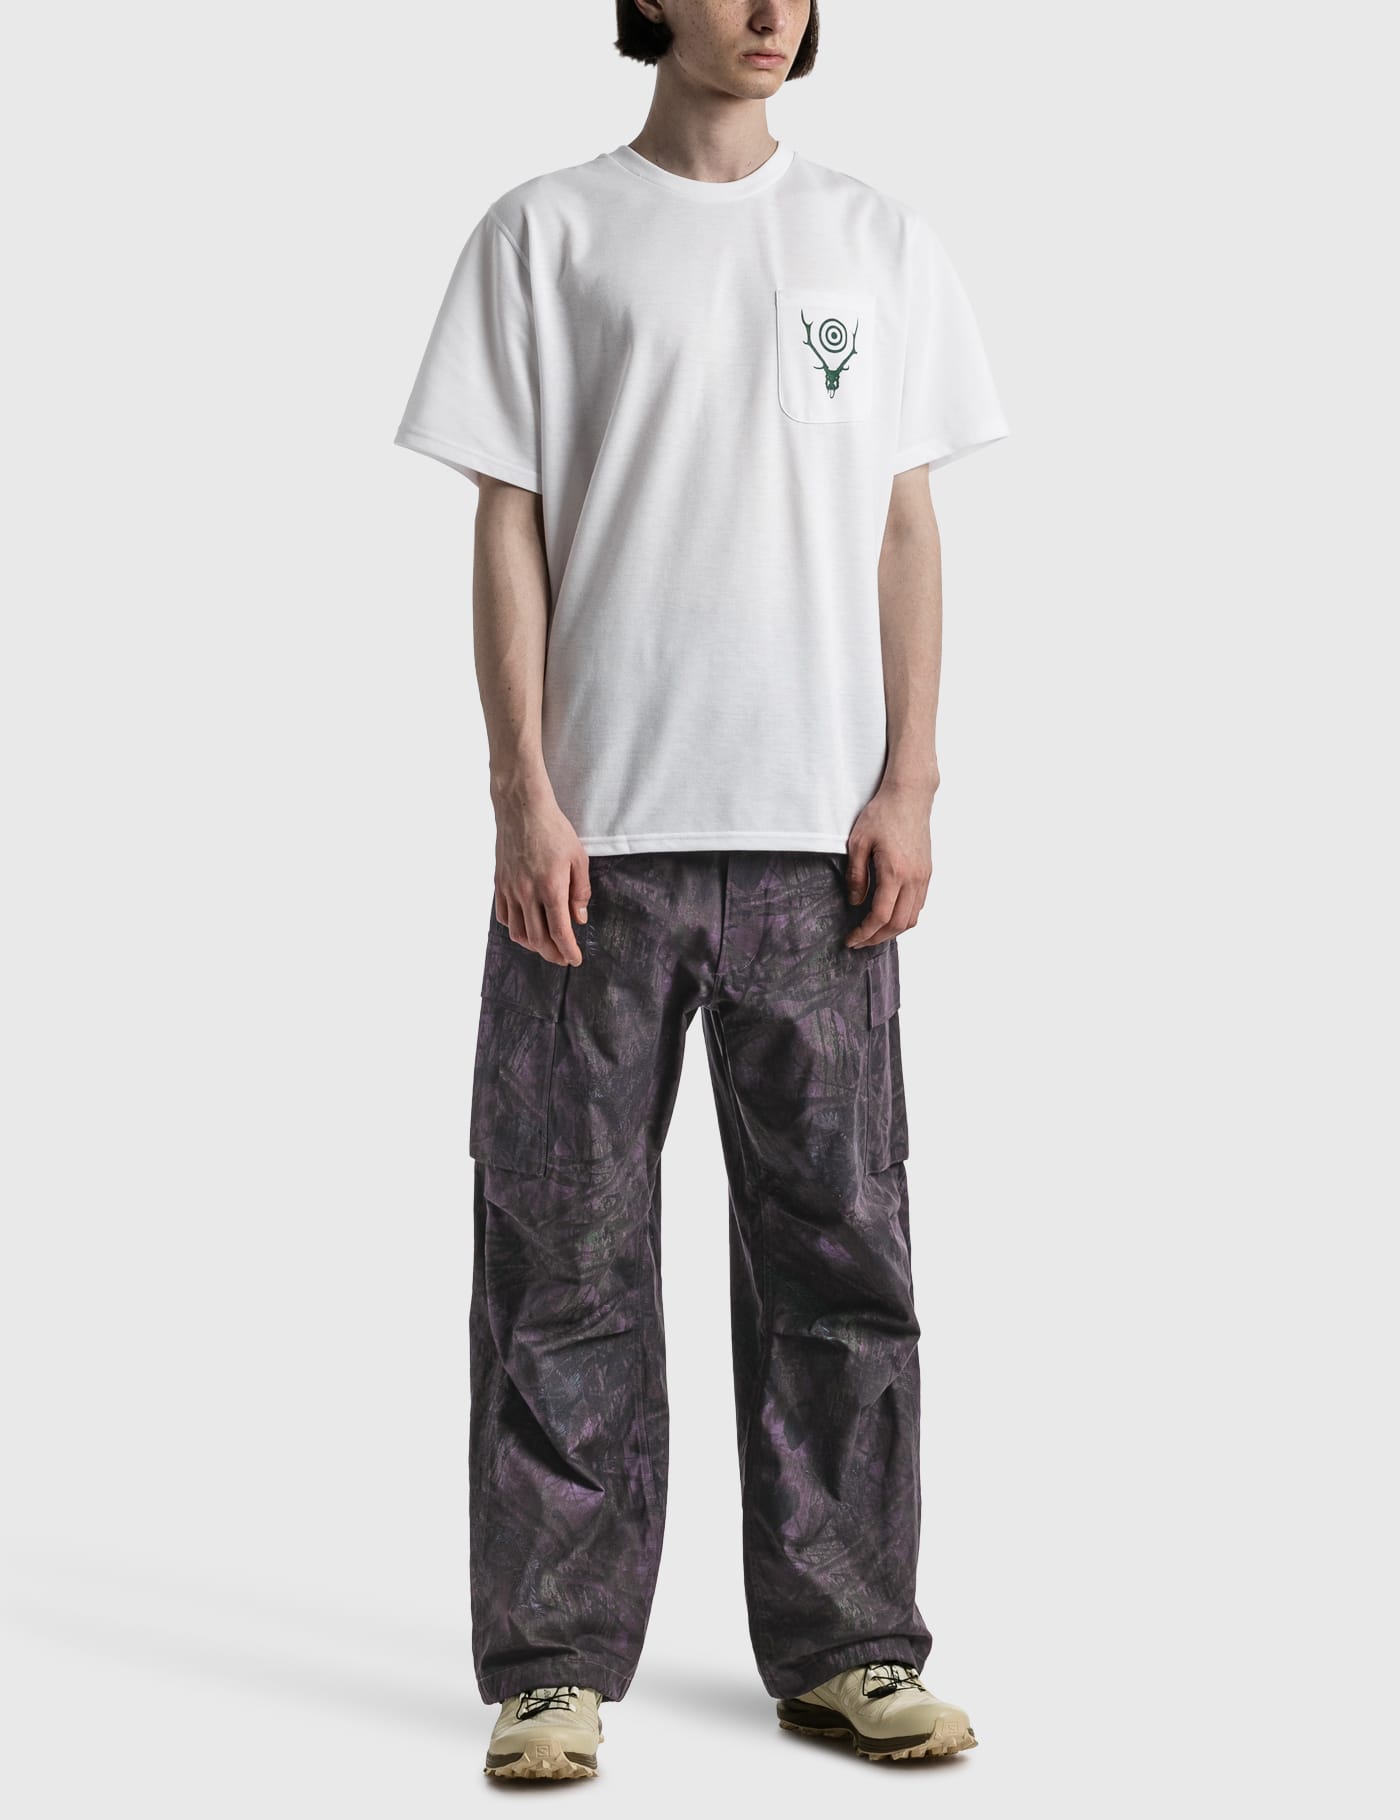 South2 West8 - Belted BDU Pants | HBX - Globally Curated Fashion 